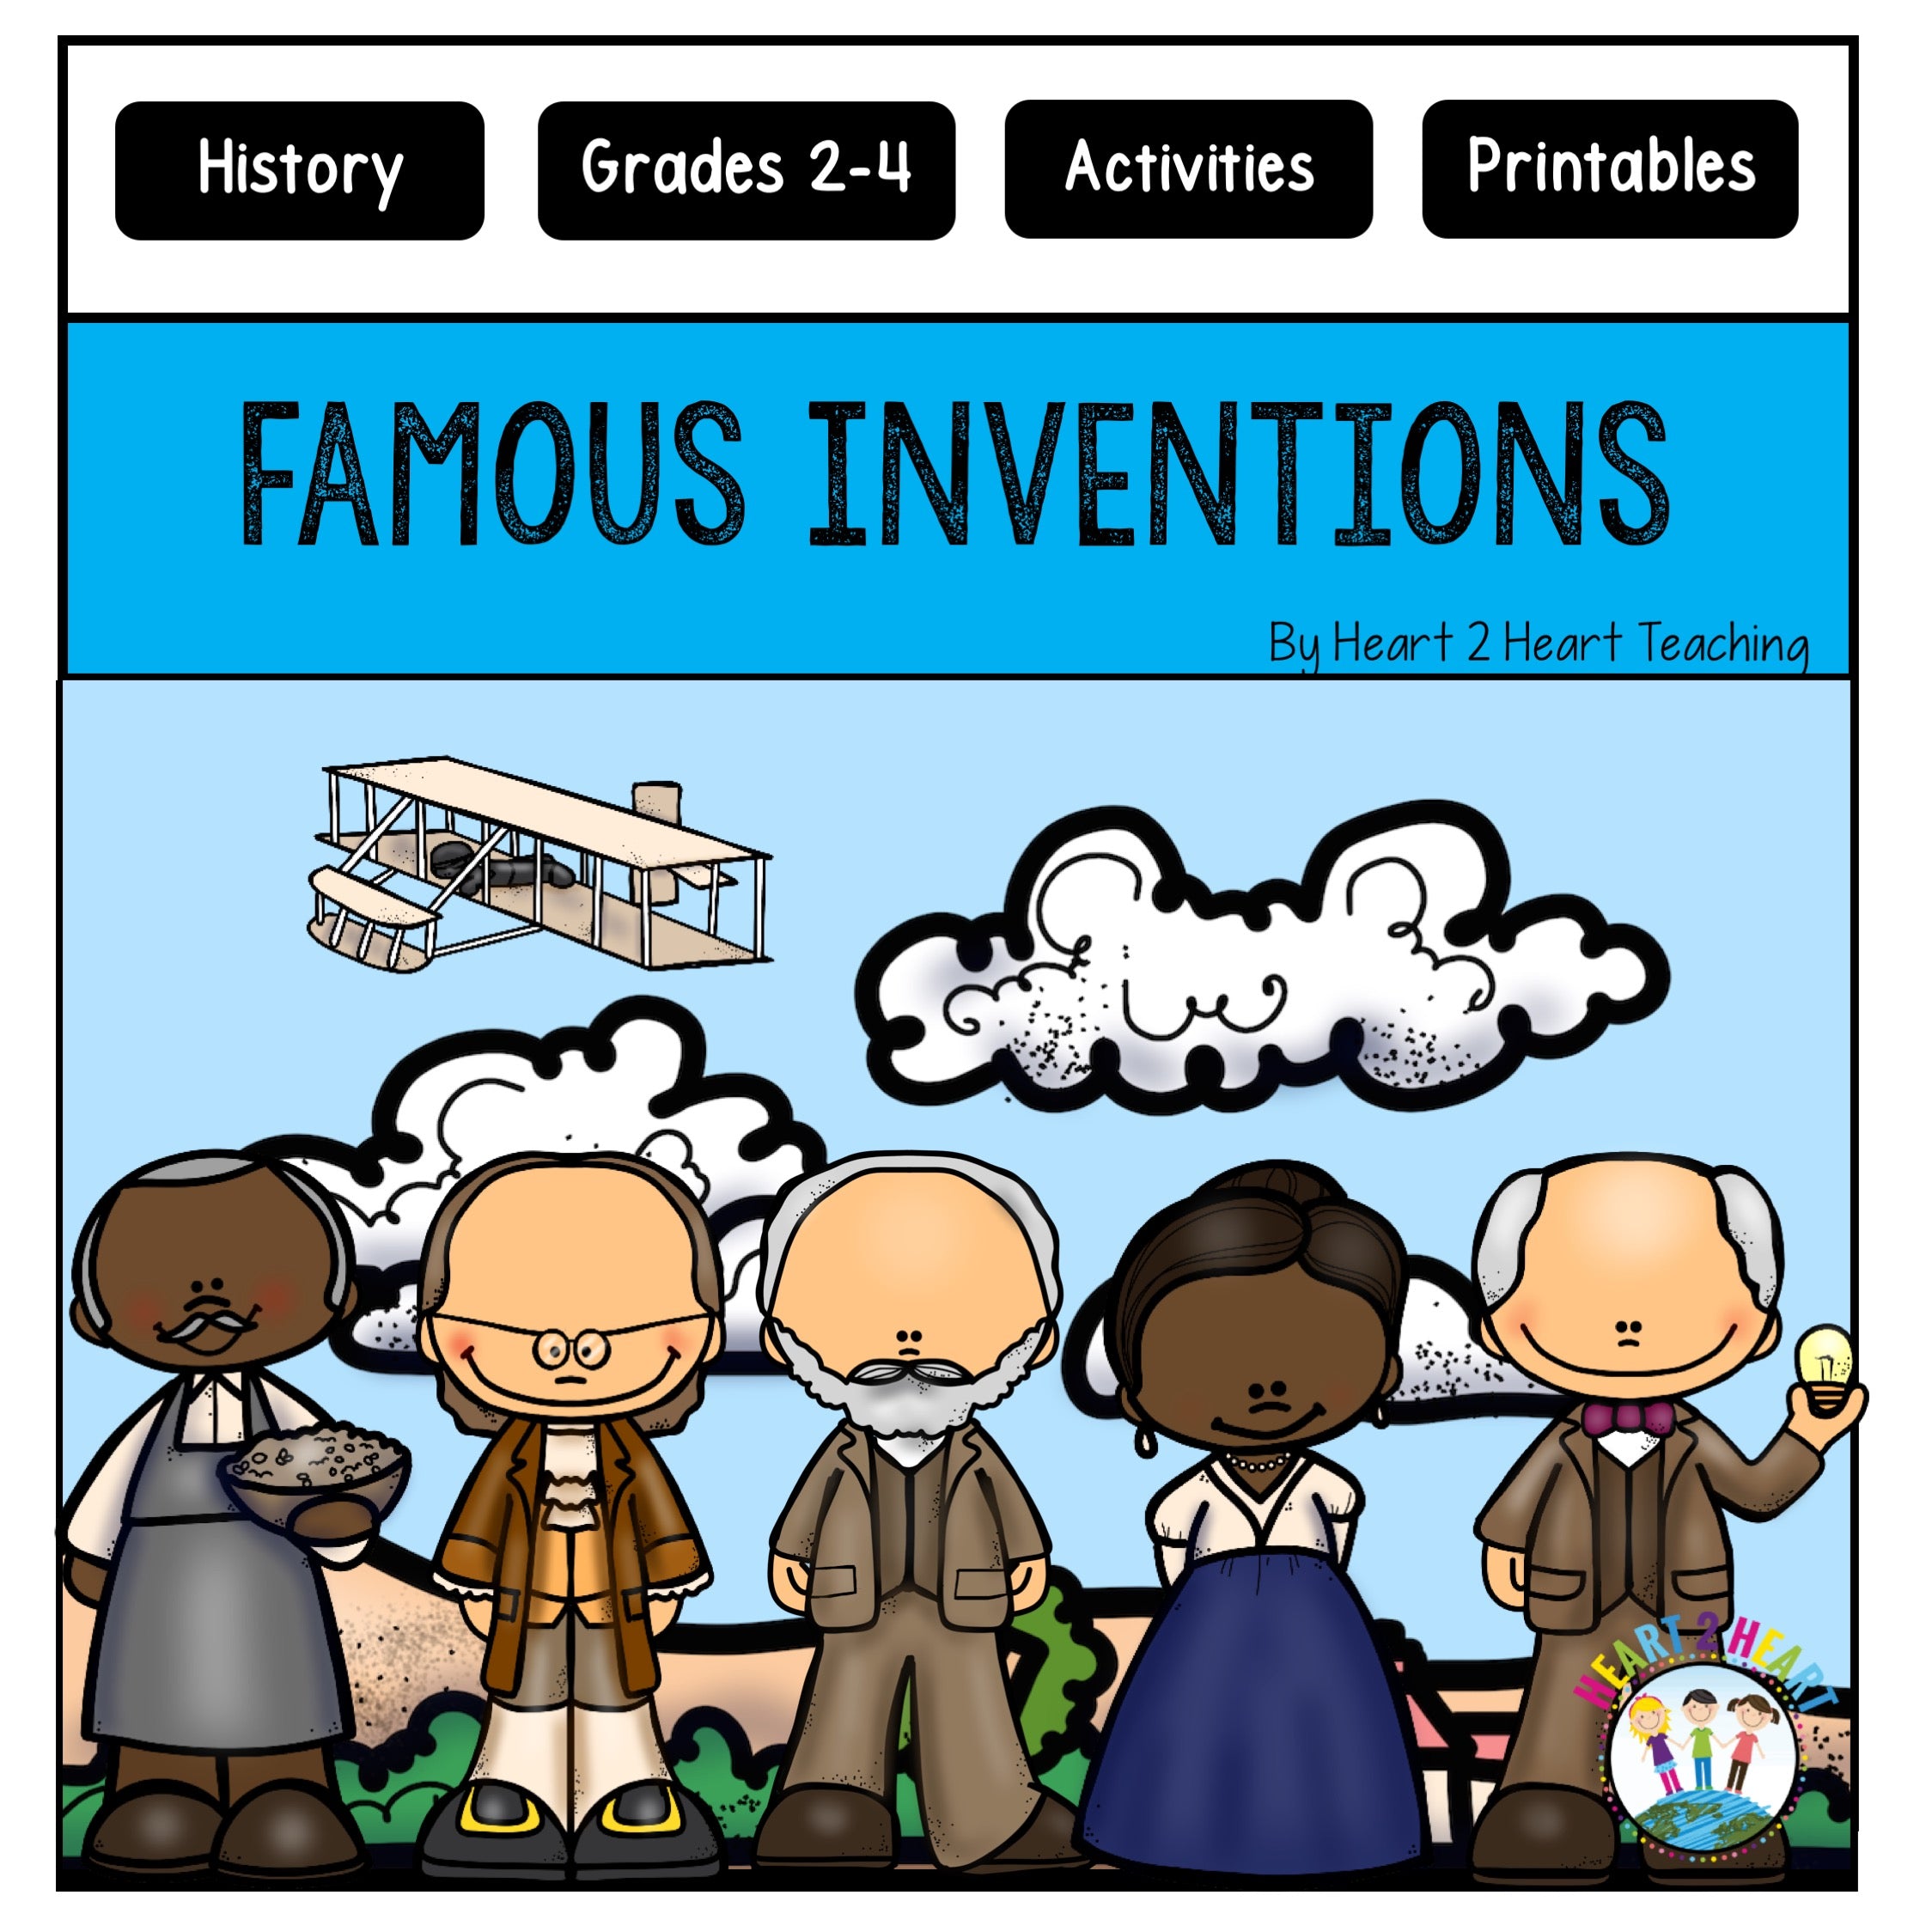 Great Inventions that Changed the World